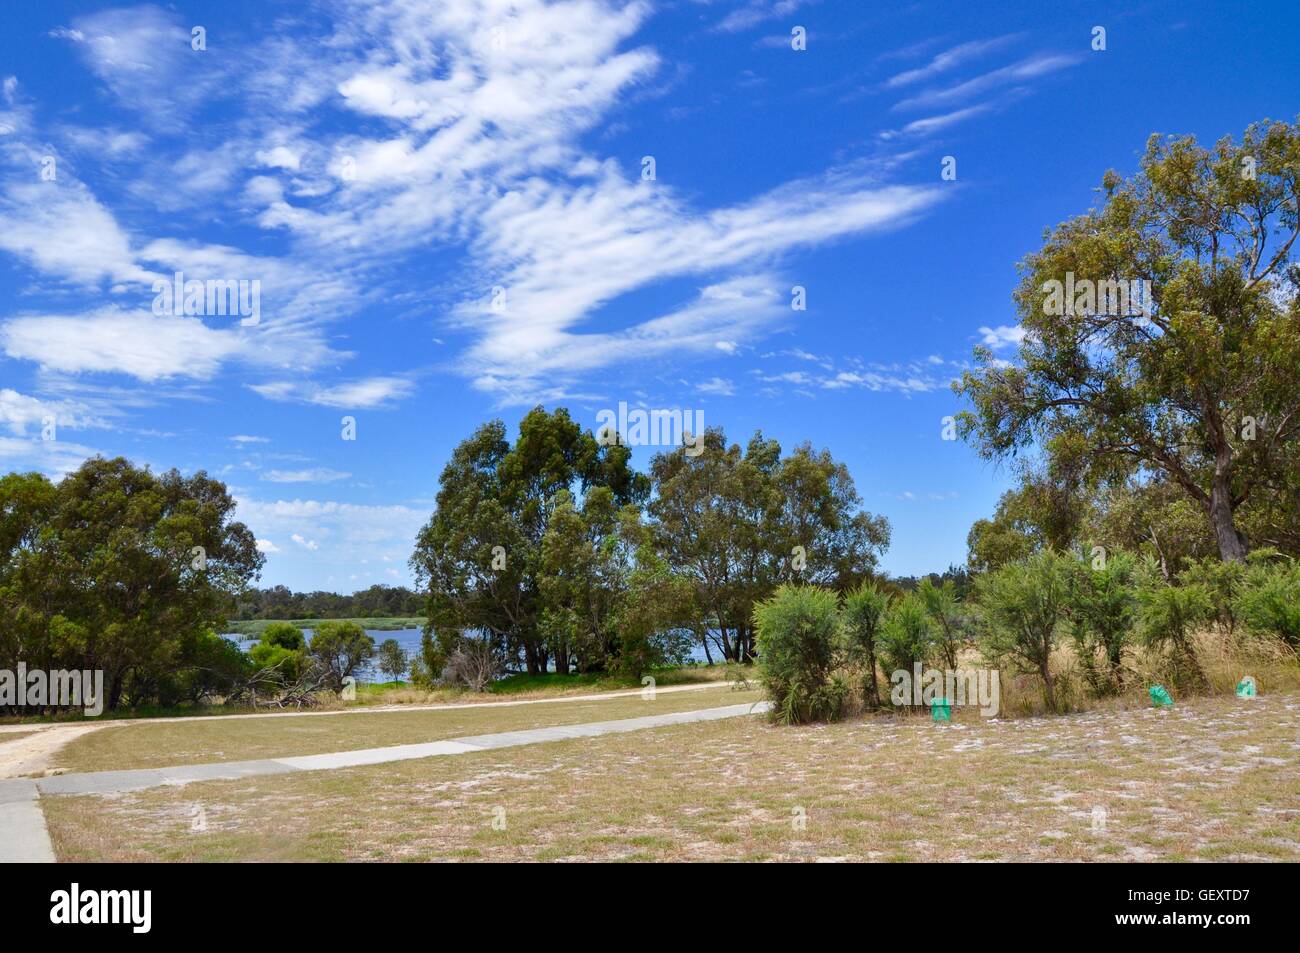 Pedestrian paths through the Bibra Lake reserve with lake, tall trees and fresh plantings under a blue sky in Western Australia. Stock Photo